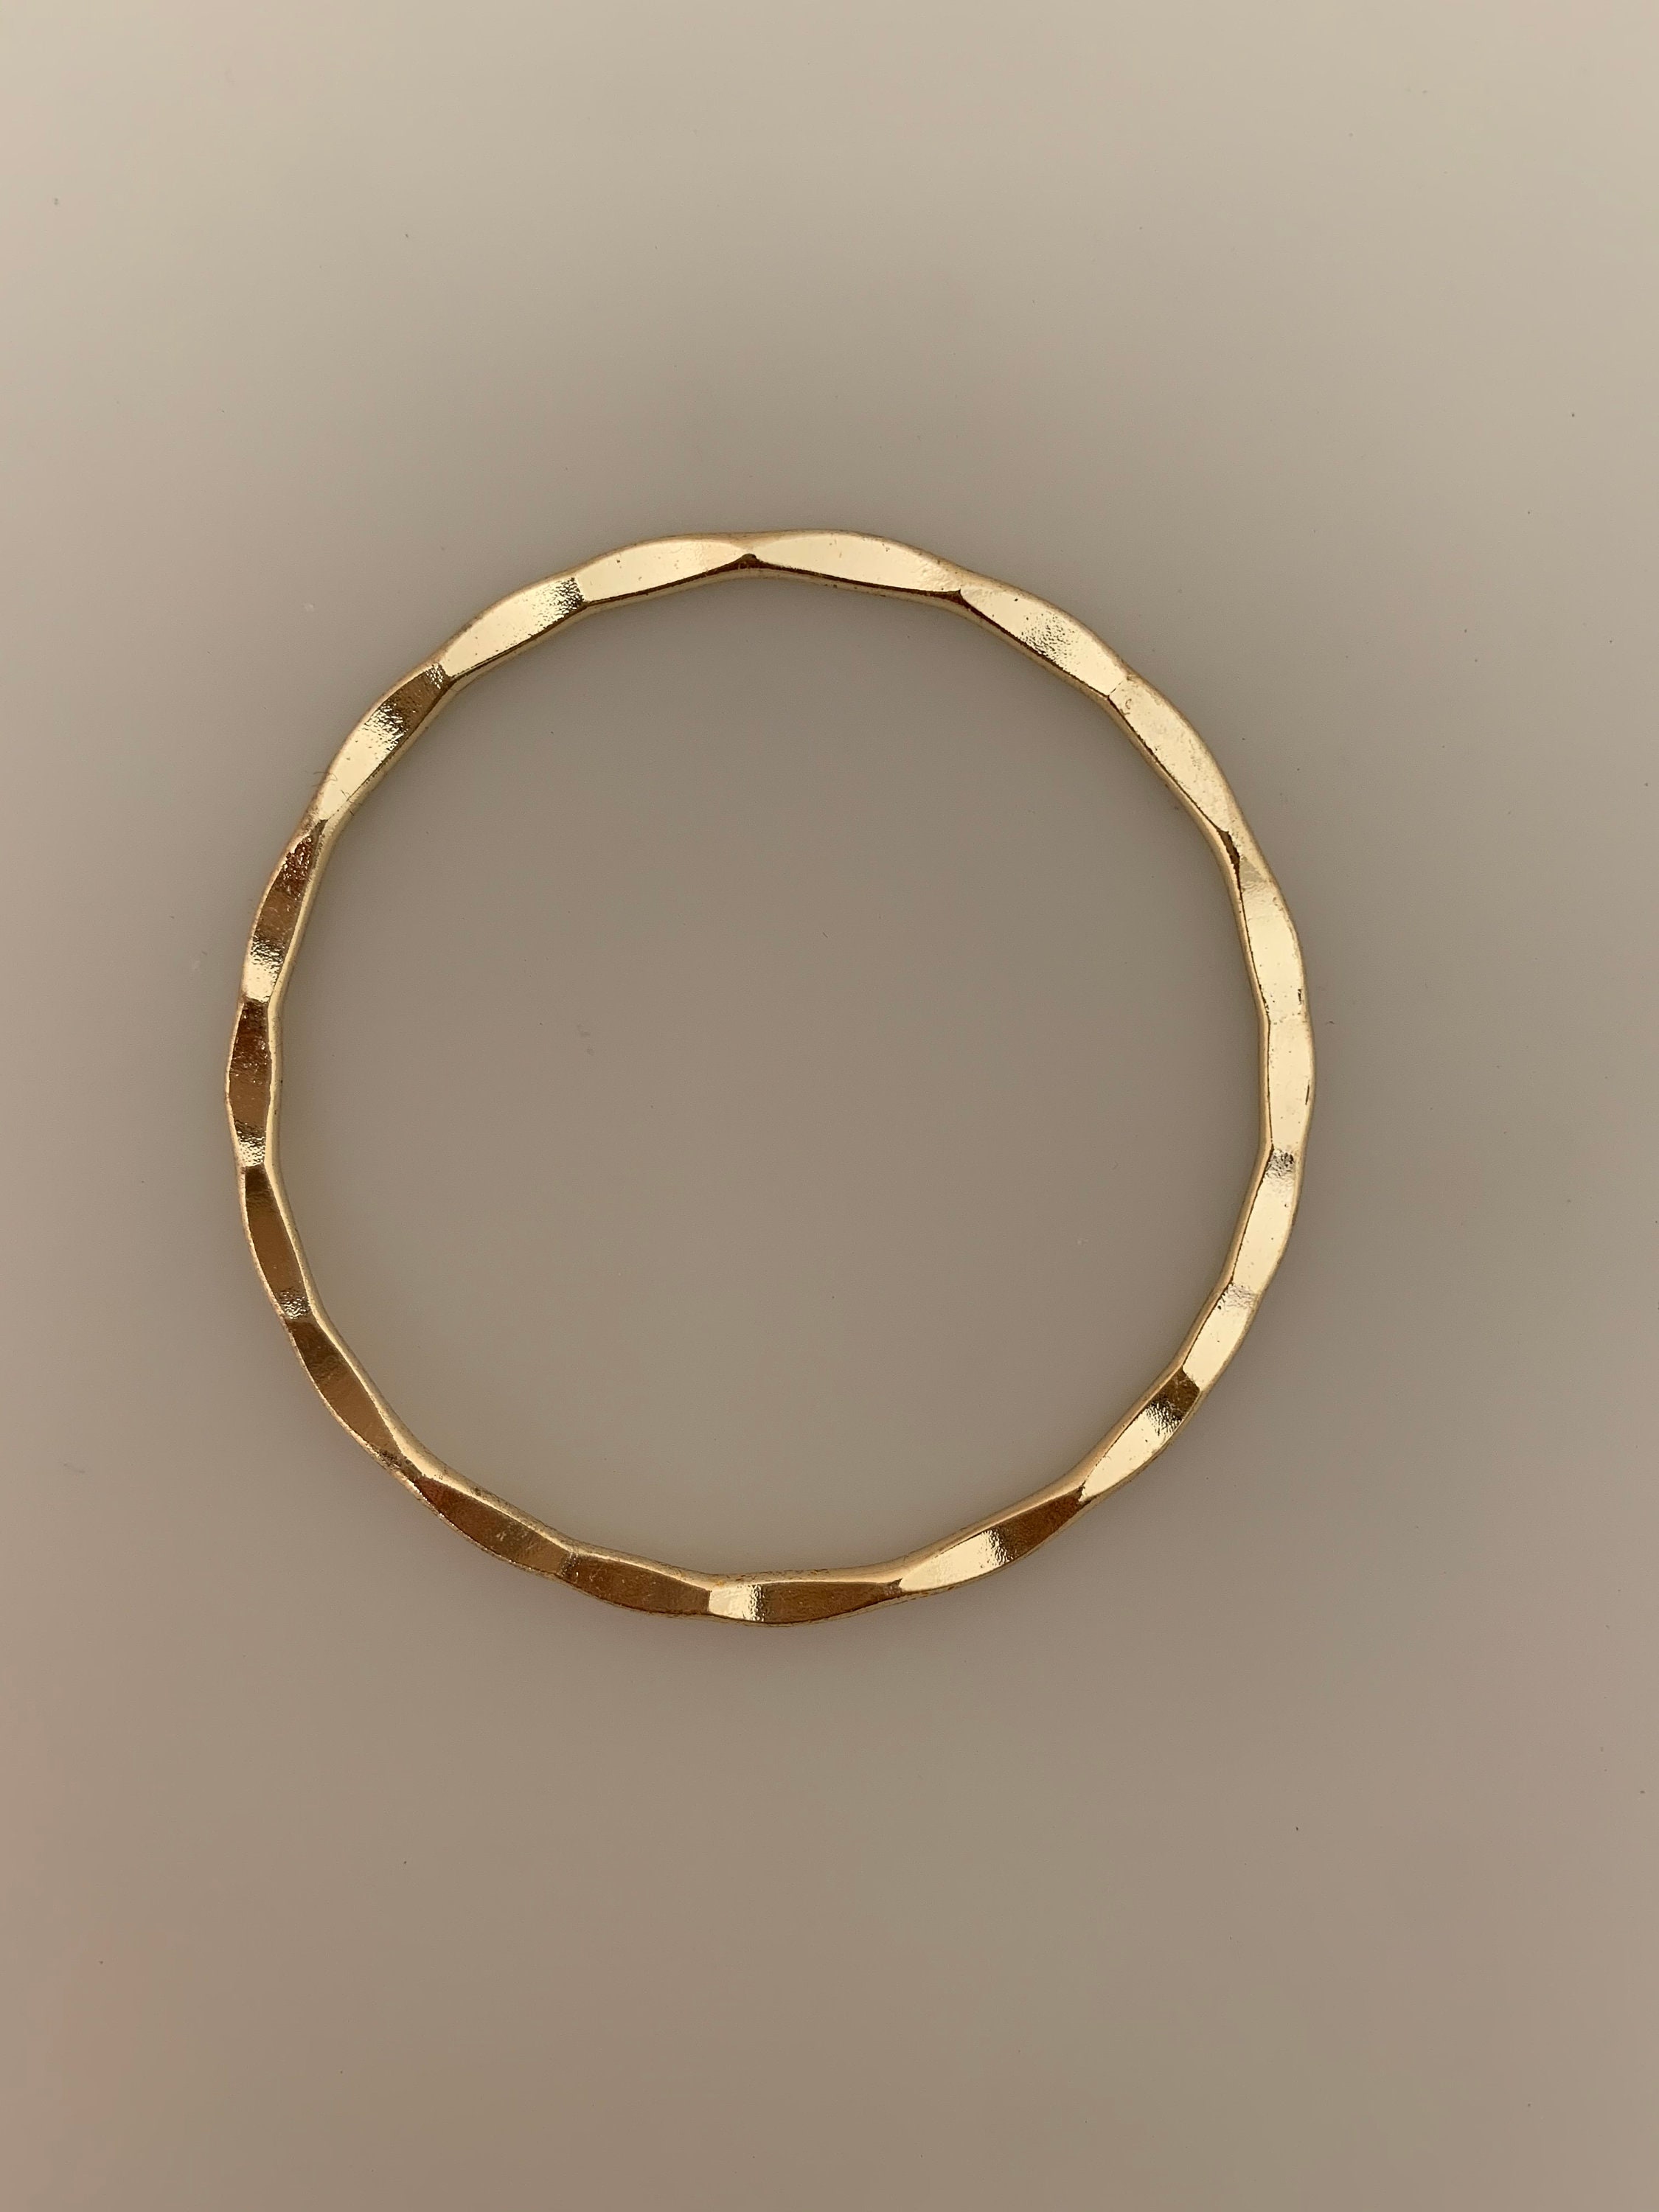 Hammered Hoops 50mm 6pcs Gold Hoops Silver Hoops E-coated - Etsy